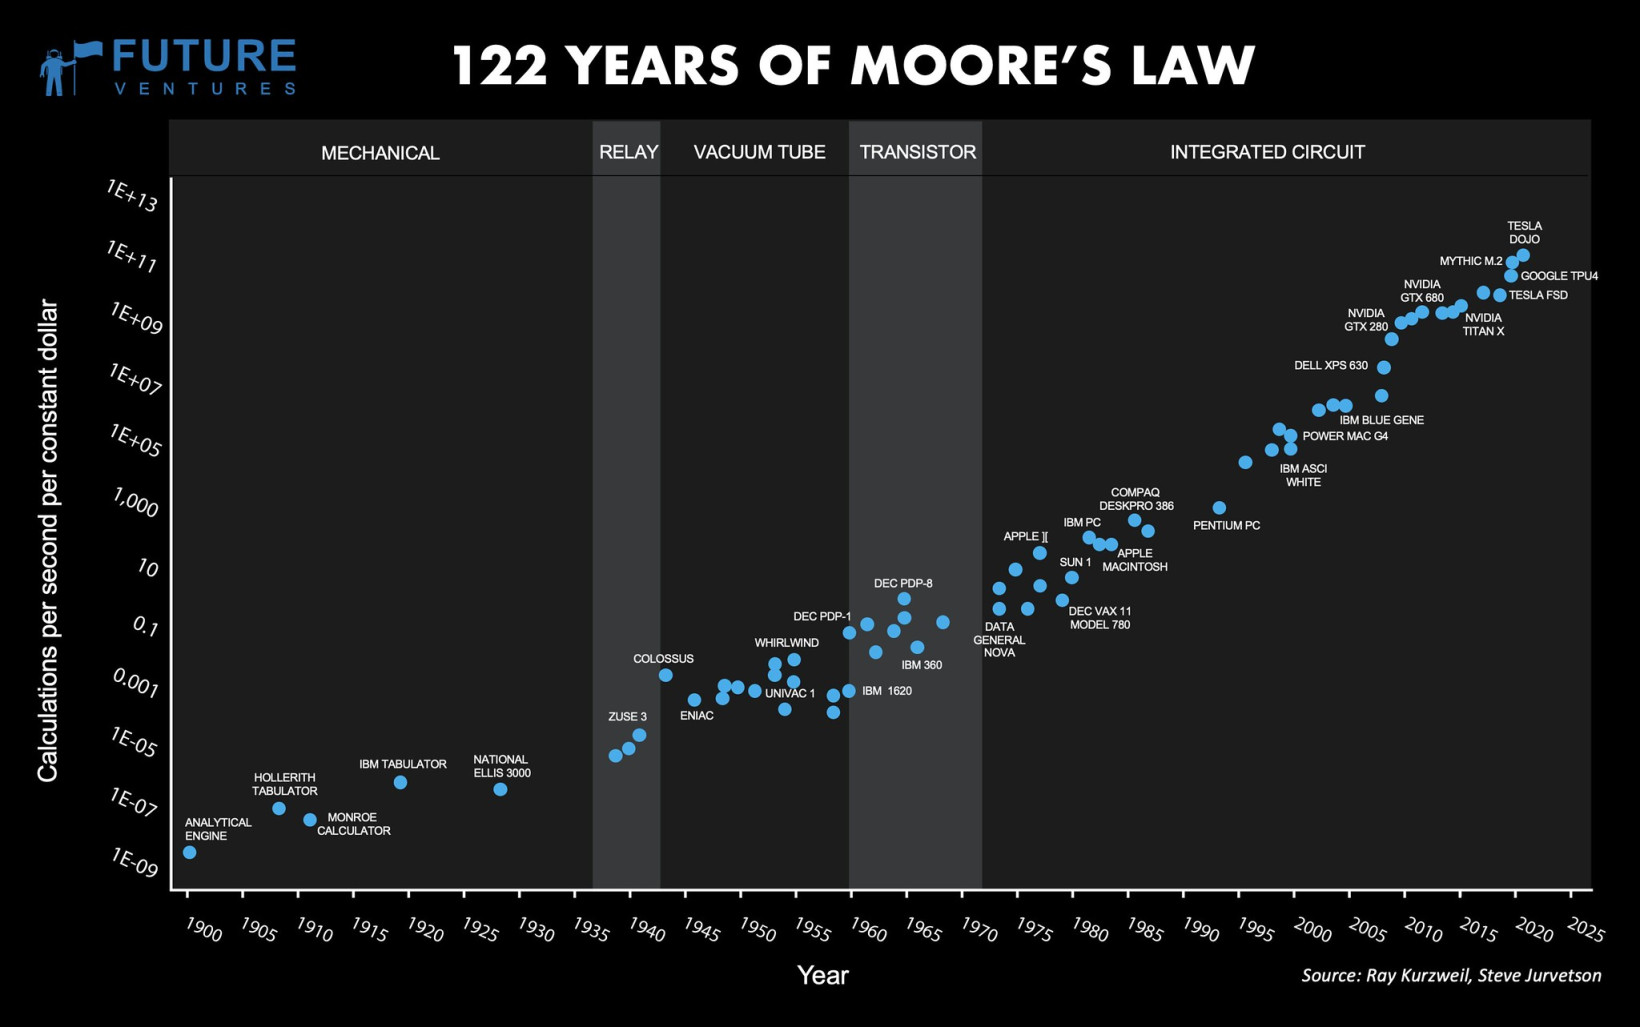 Moore's Law, a prediction that the number of transistors per chip doubles every two years, is showing signs of slowing down